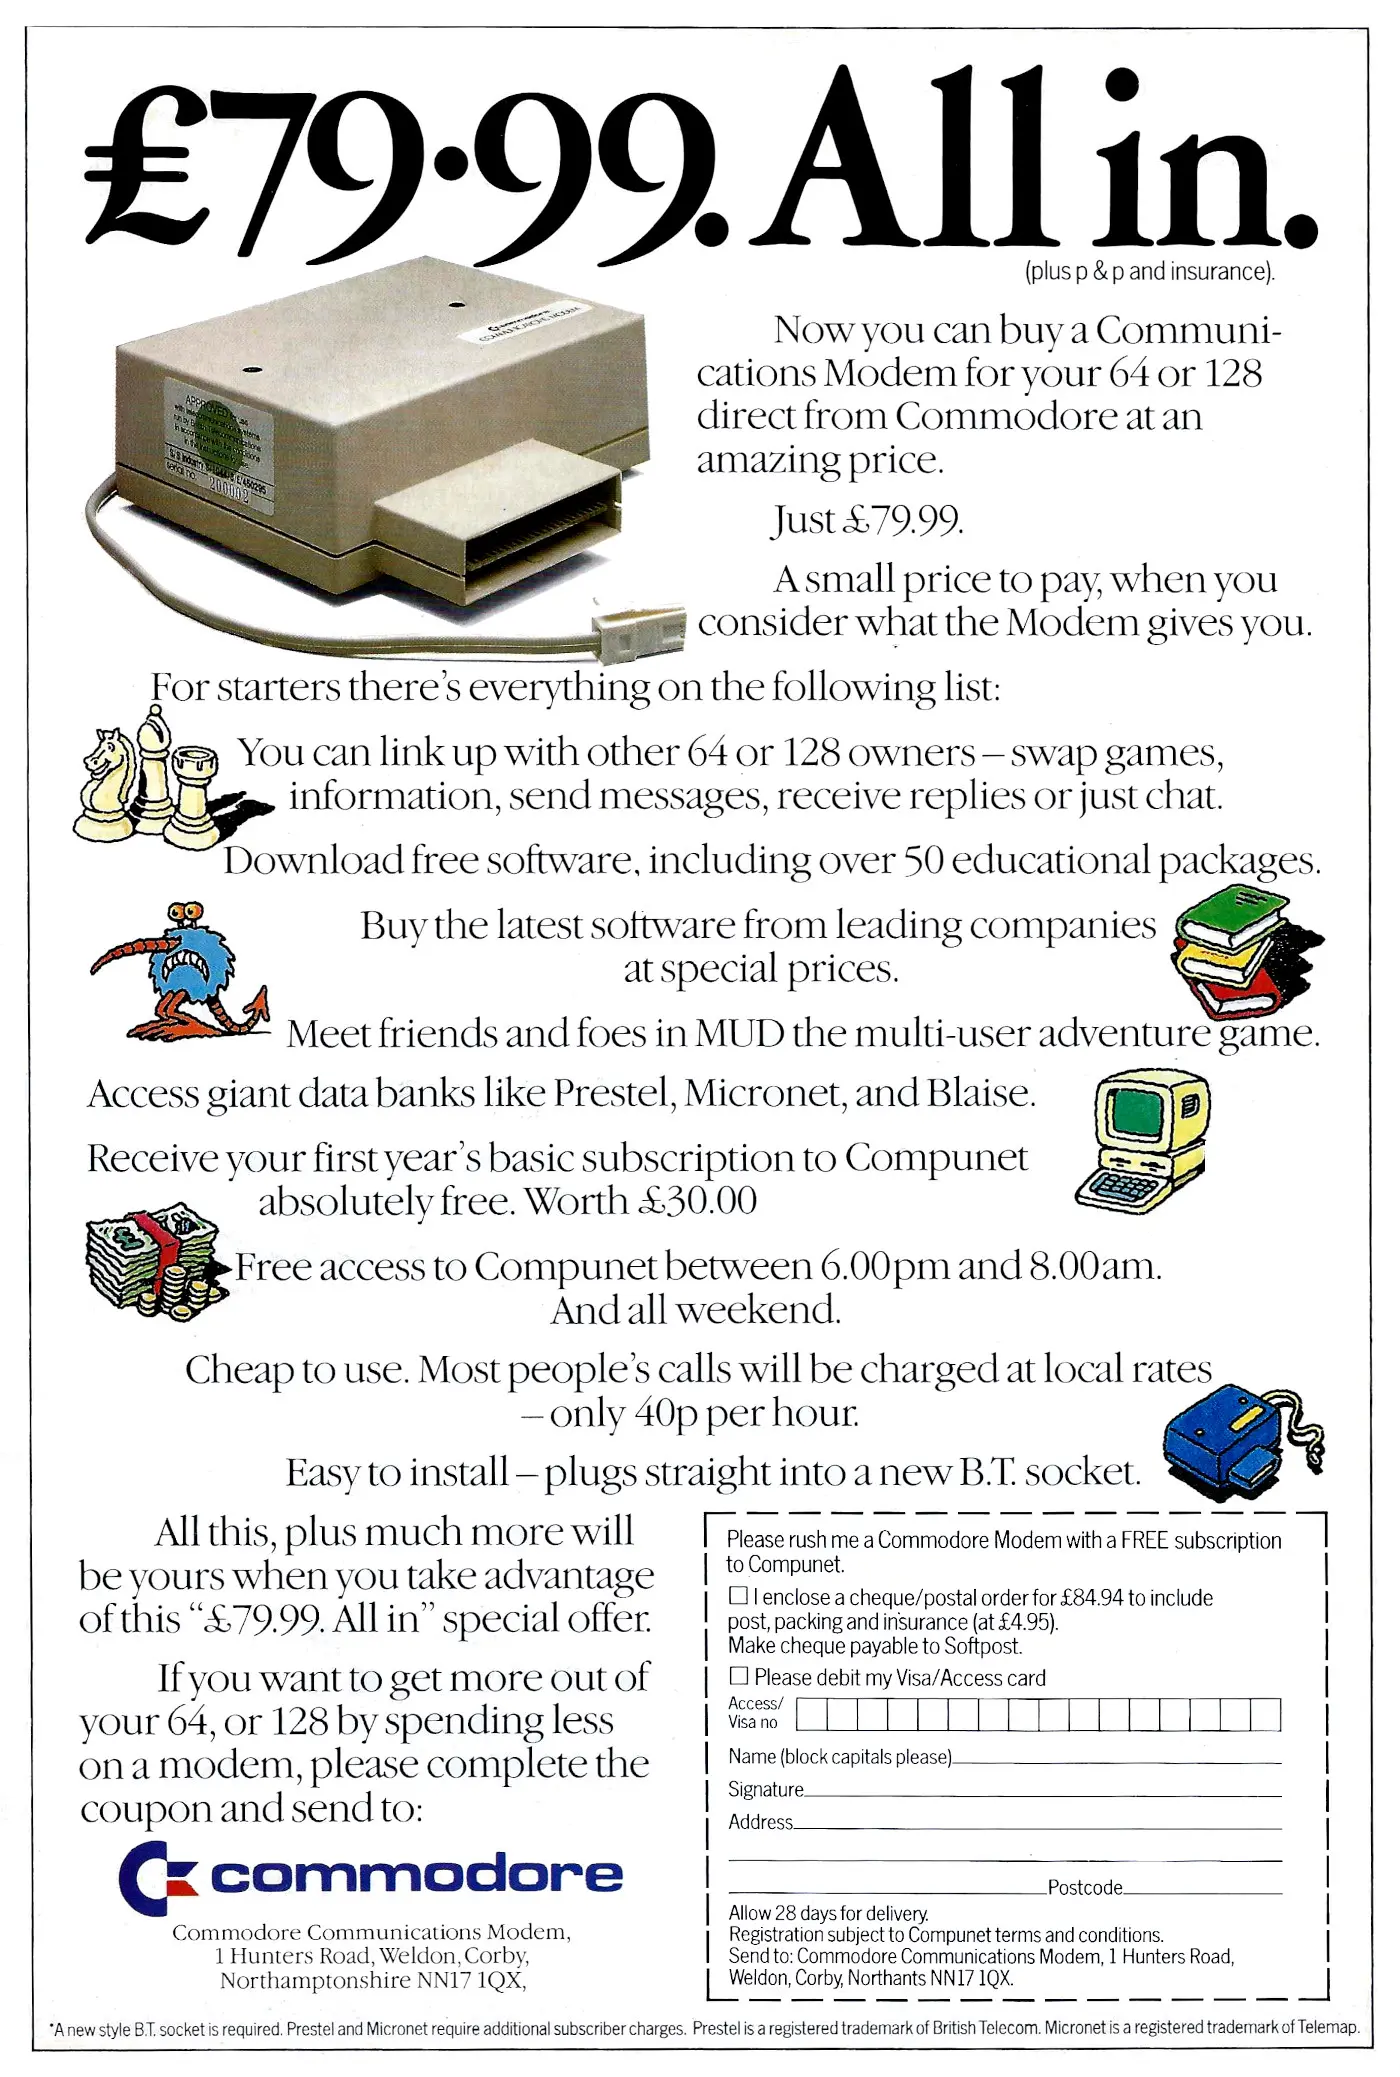 Commodore Advert: £79.99 all in: the Commodore Communications Modem, from Commodore Computing International, December 1985